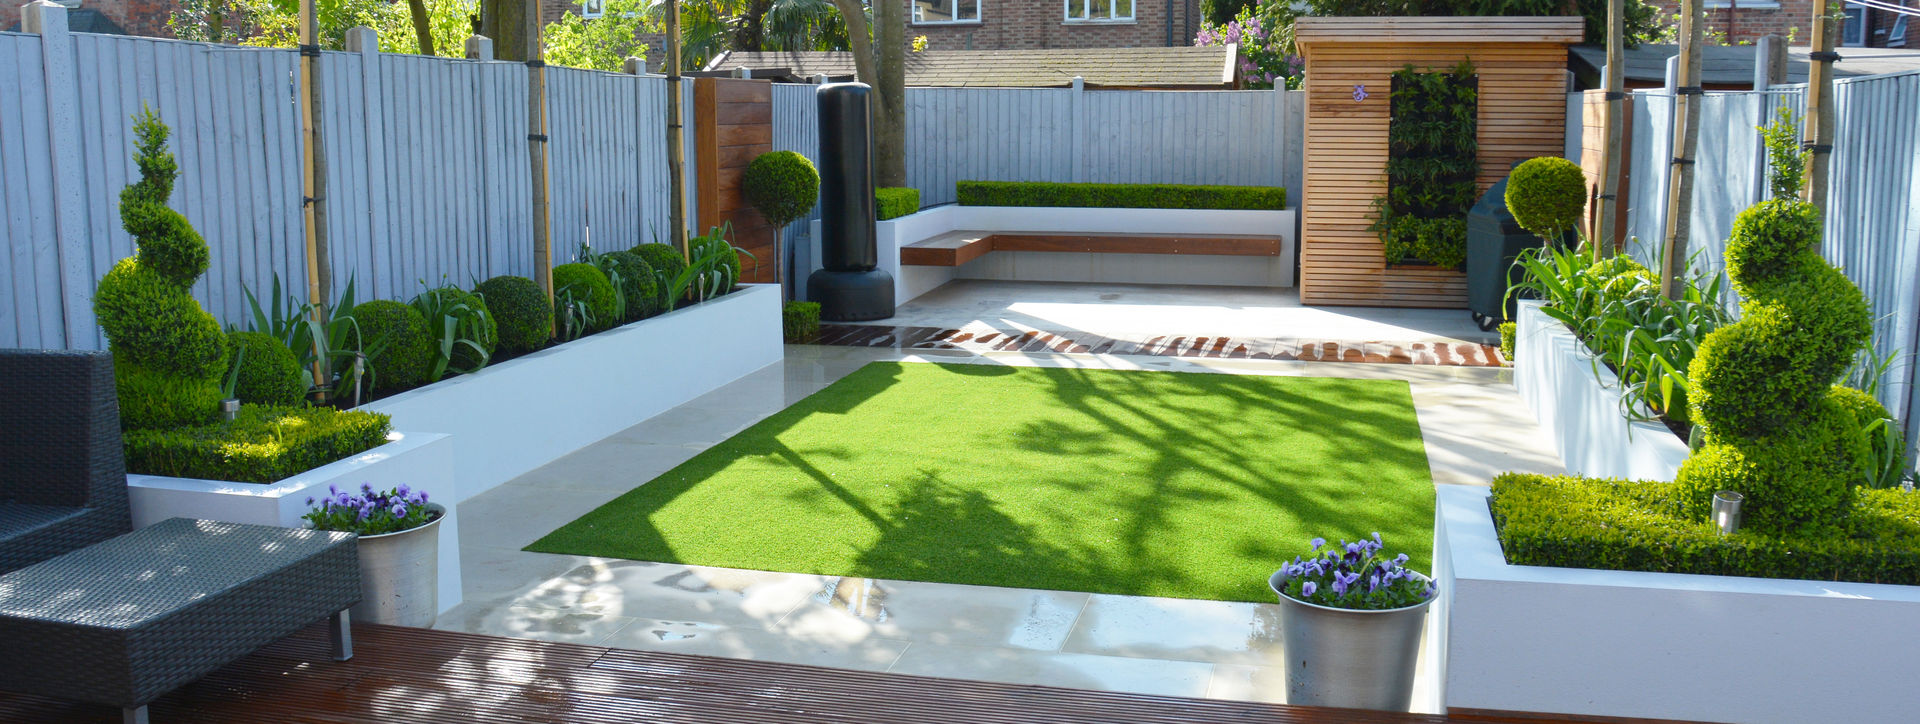 Minimalist Garden: Amazing relaxing space that you will fall in love with, Landscaper in London Landscaper in London Minimalist style garden